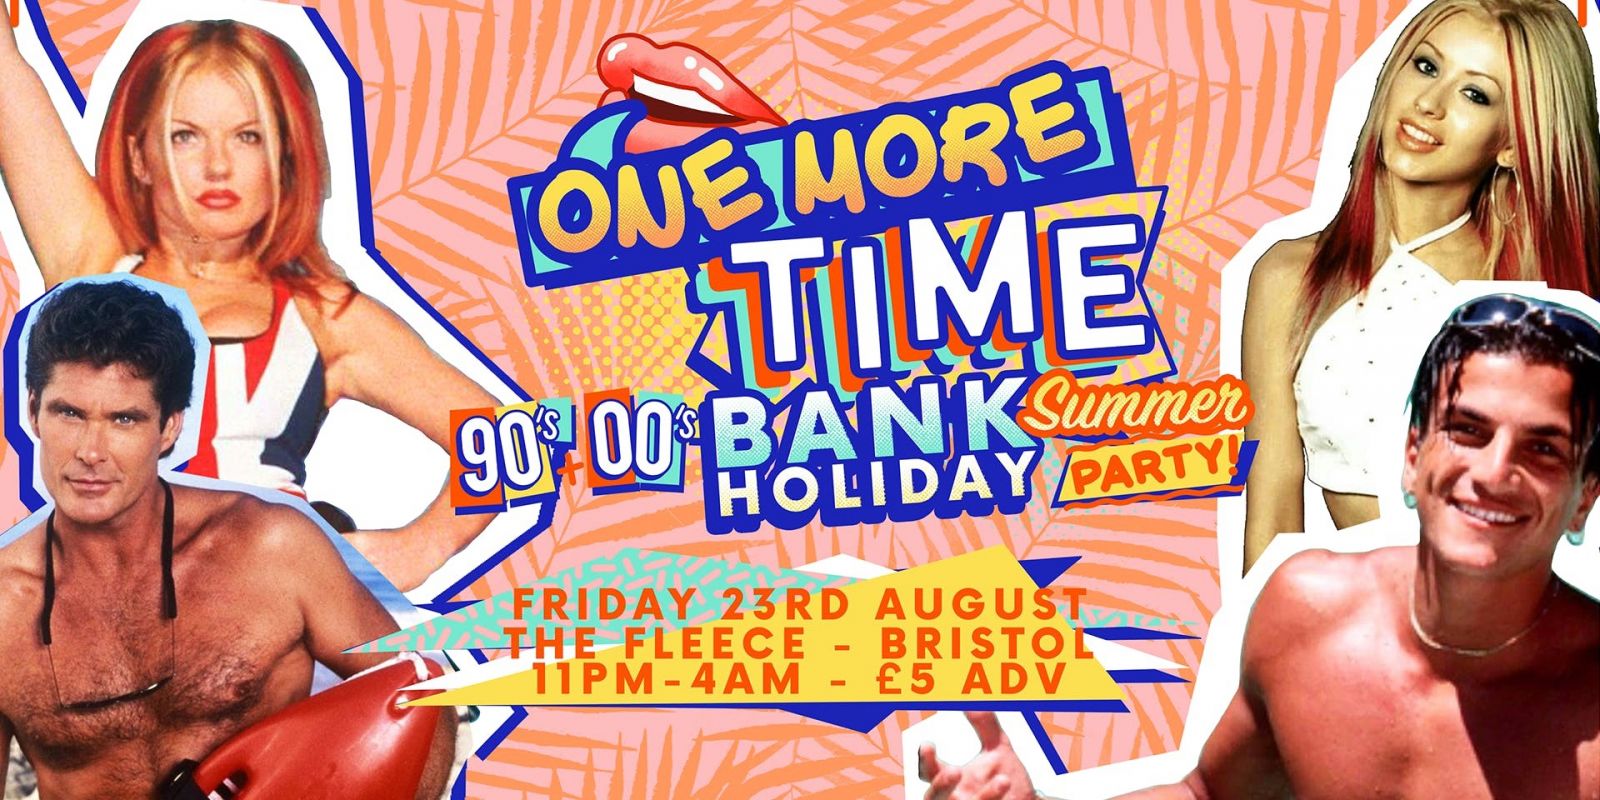 One More Time at The Fleece // Friday 23rd August 2019